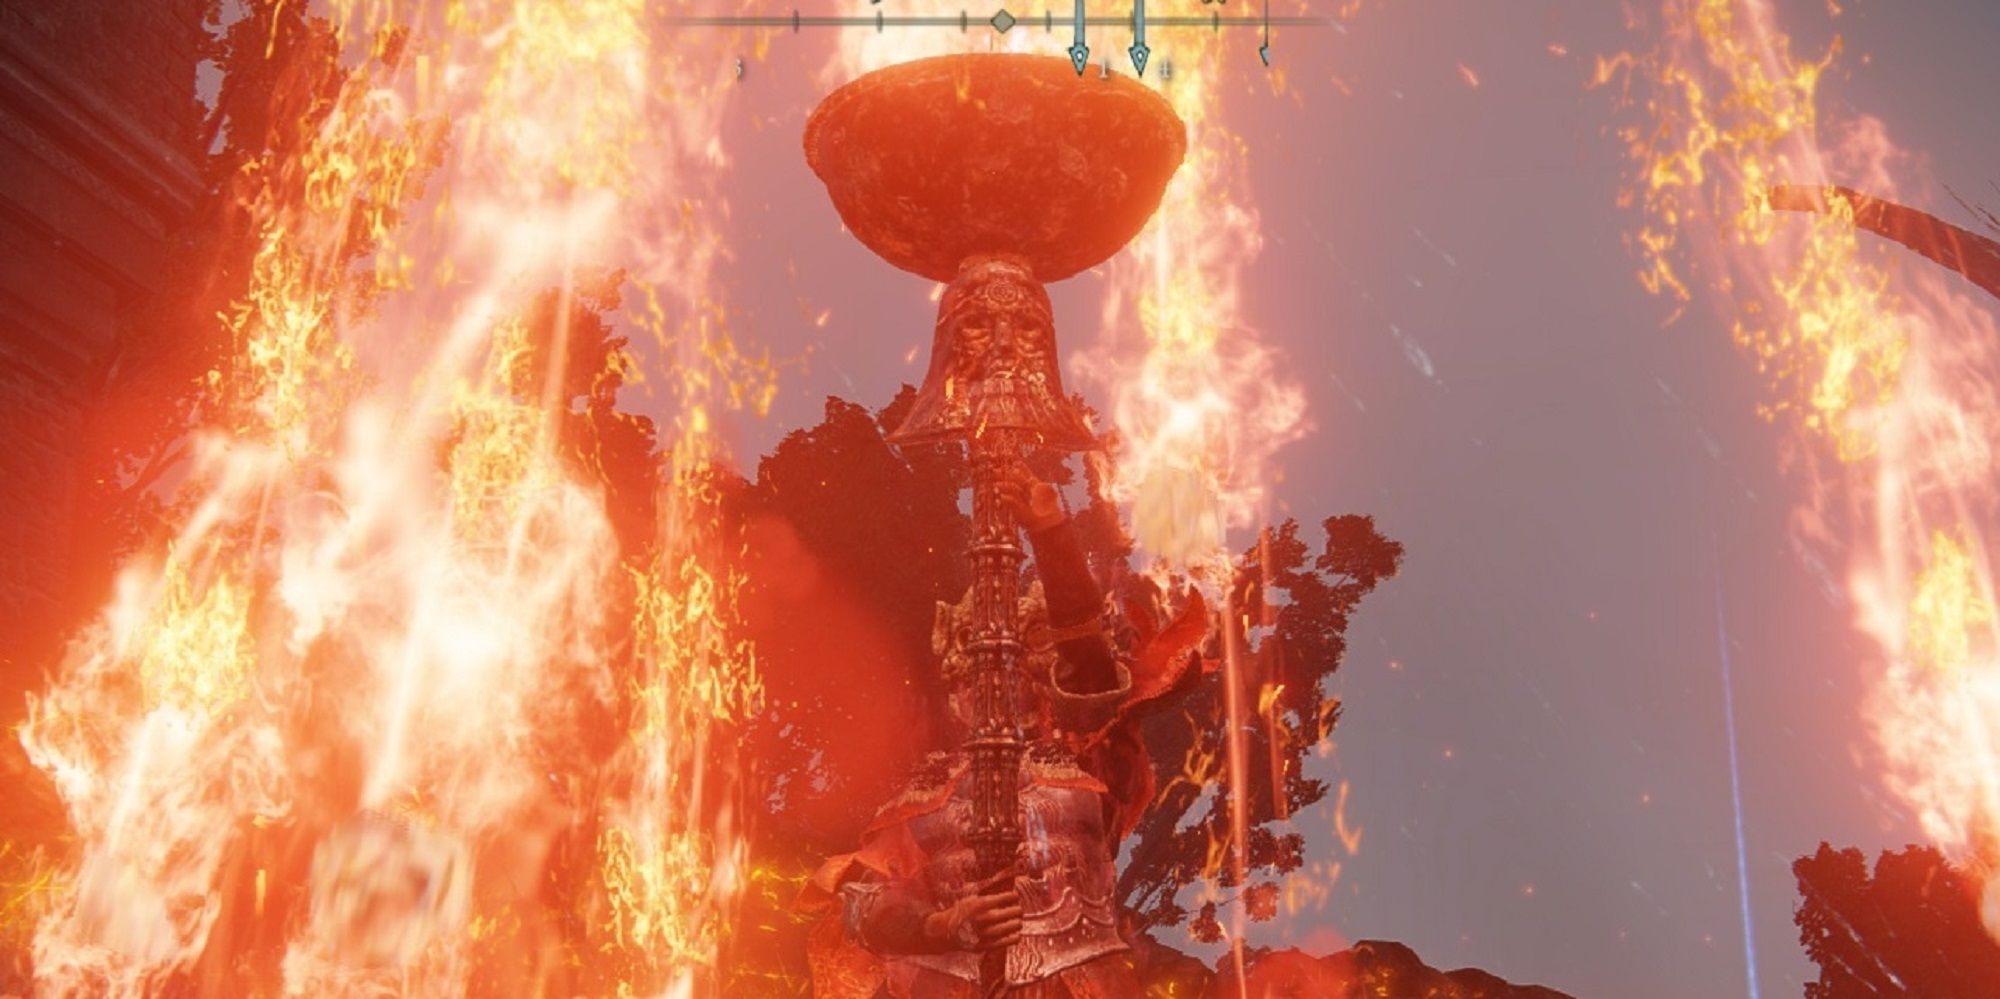 Elden Ring Character holding Cranial Vessel Candlestand as it erupts with fire